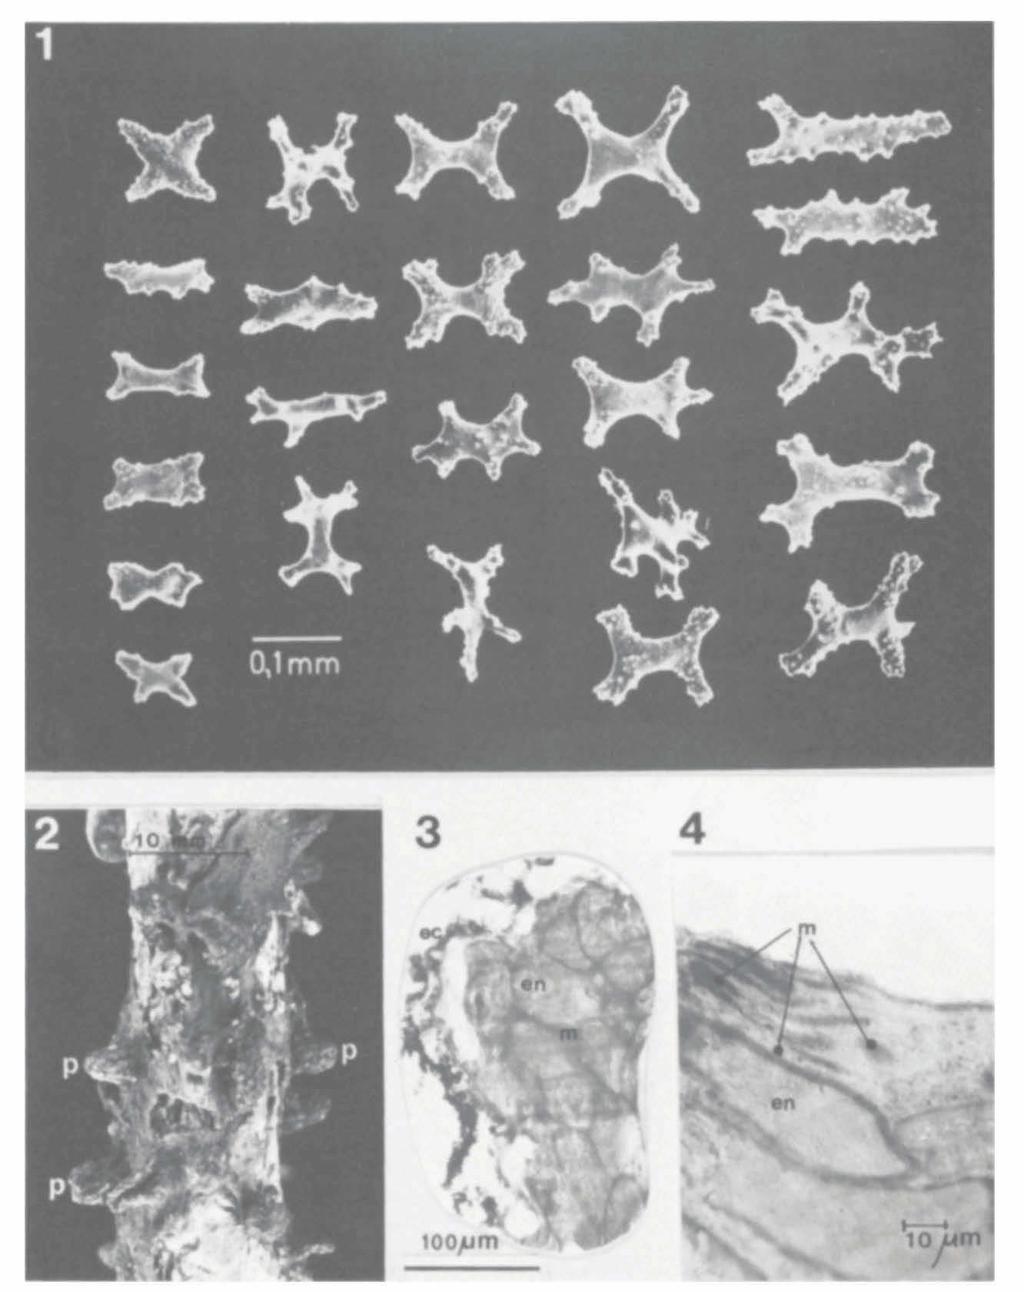 OCANA, BRITO & NUNEZ: A NEW SPECIES OF SARCODICTYON FROM TENERIFE 425 Figs. 1-4. Sarcodictyon canariensis spec. nov. (holotype, RMNH 18616). Fig. 1. Sclerites of stolons and anthosteles. Fig. 2.